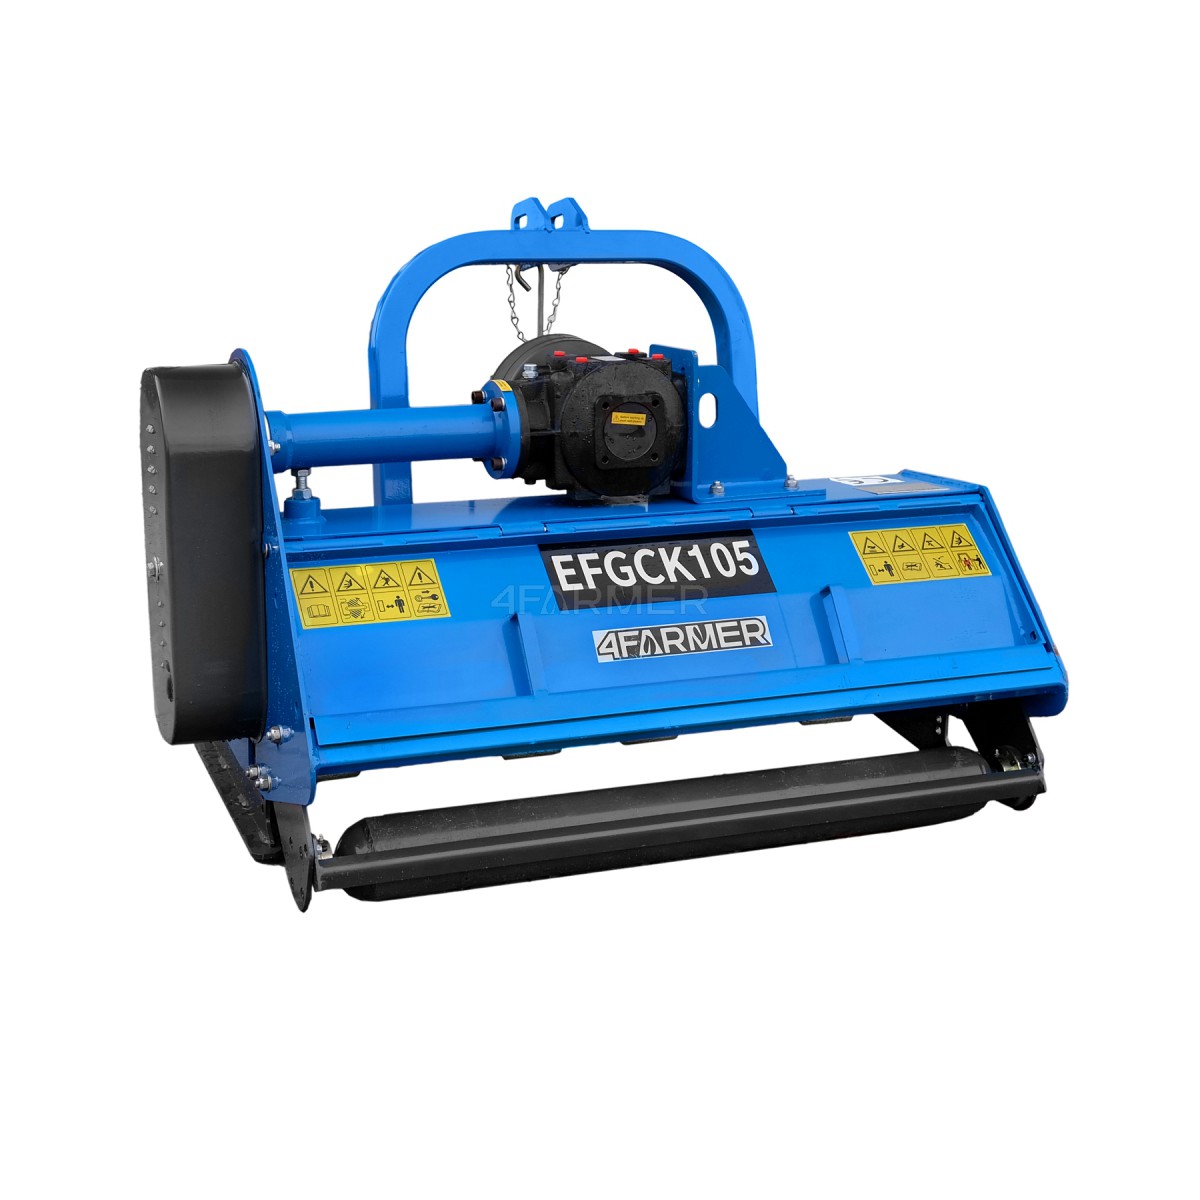 EFGC-K 115 flail mower with opening flap 4FARMER - blue